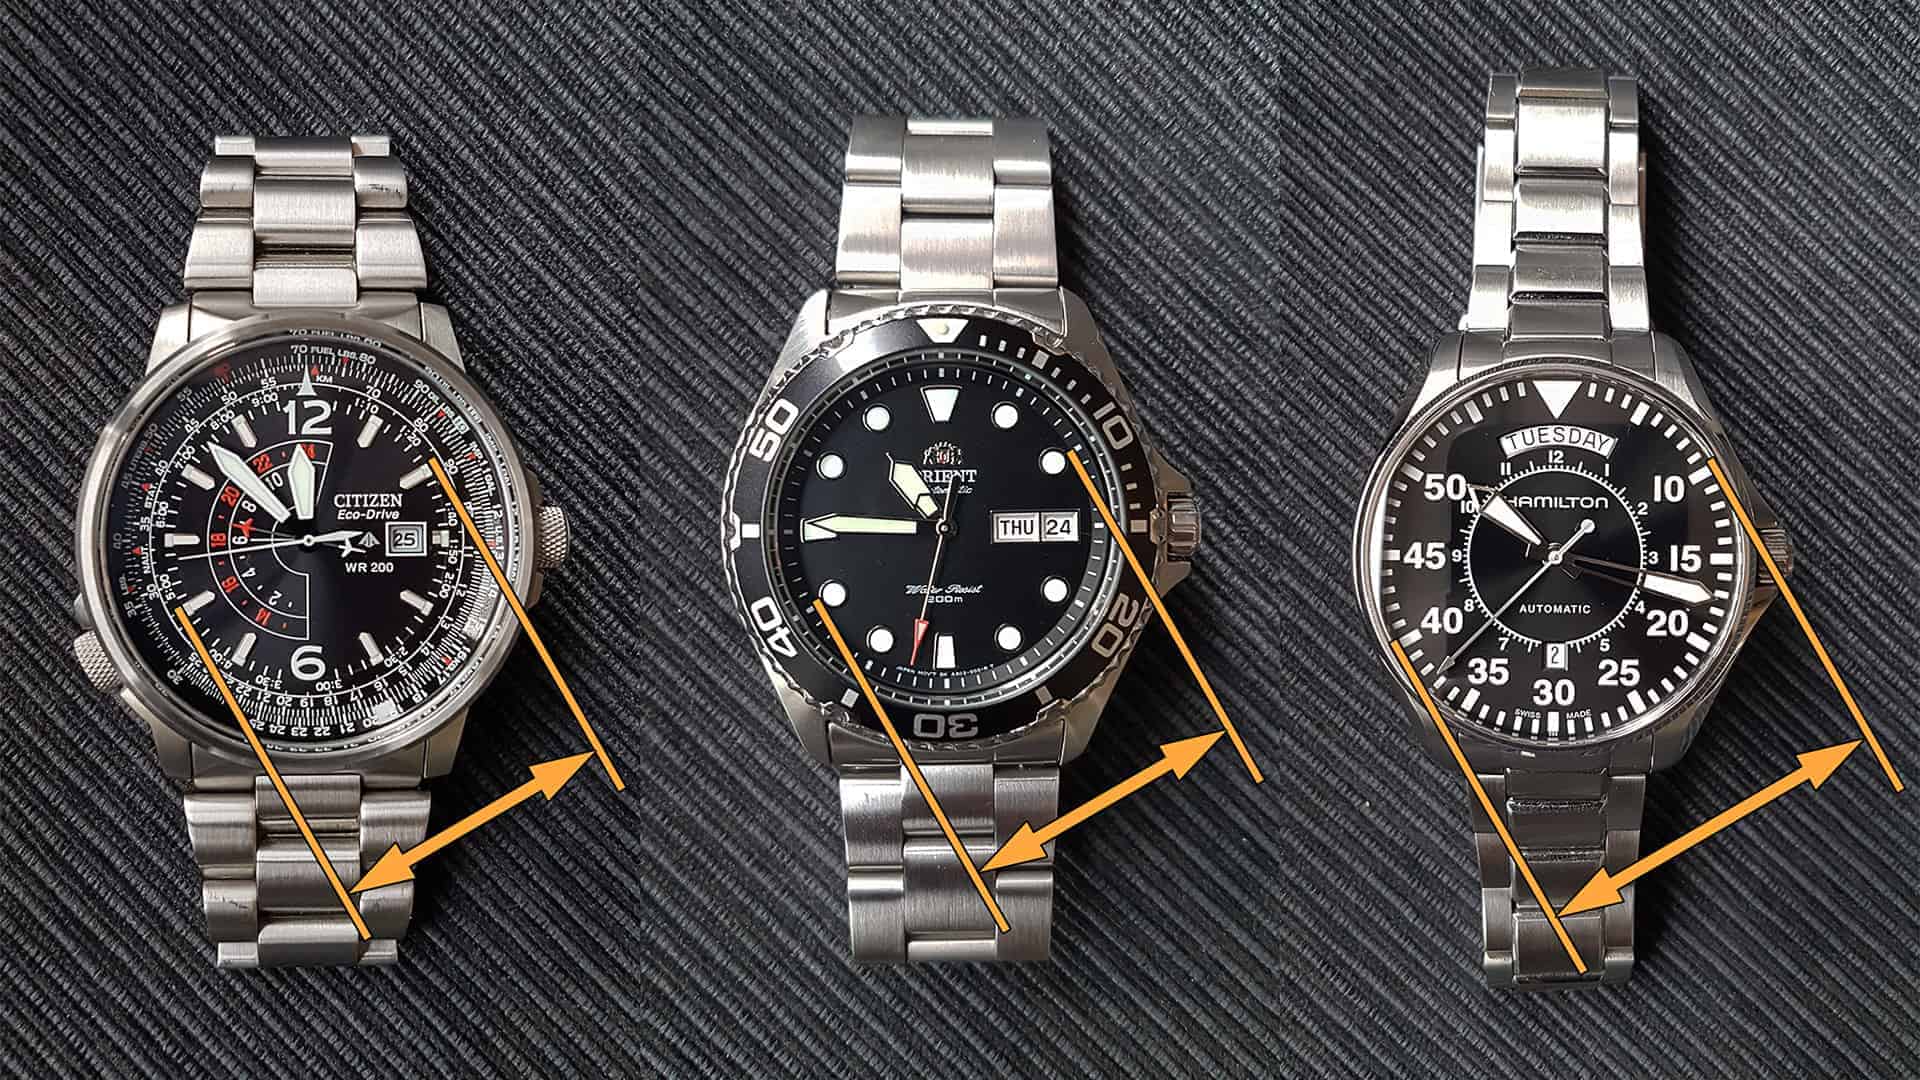 Watch Sizing Guide - Watch Affinity